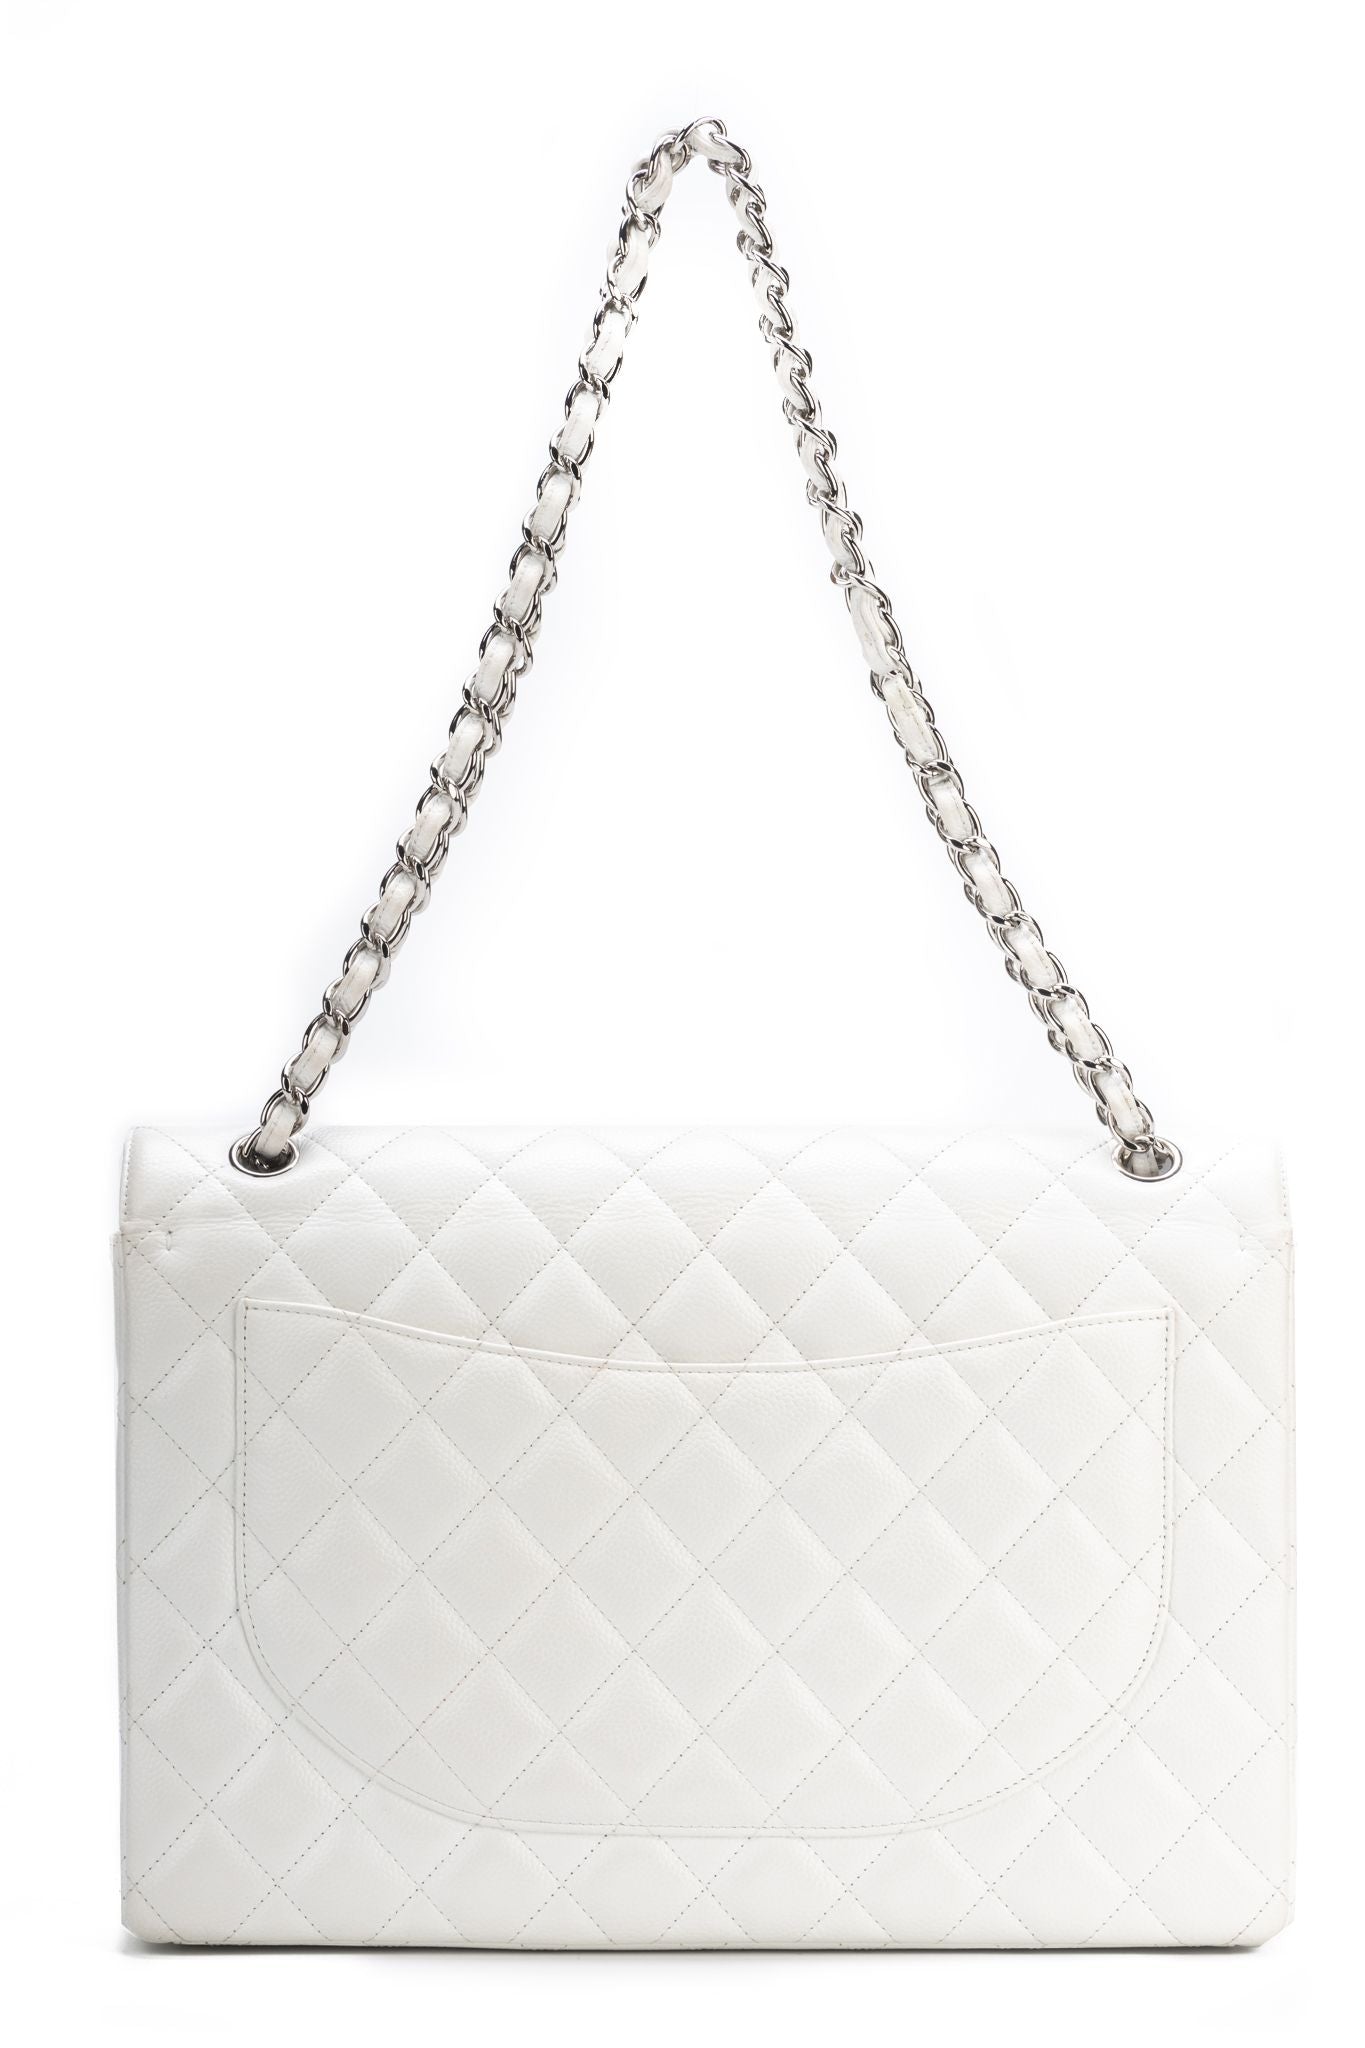 Chanel Chain Around Flap, White Caviar Leather with Gold Hardware